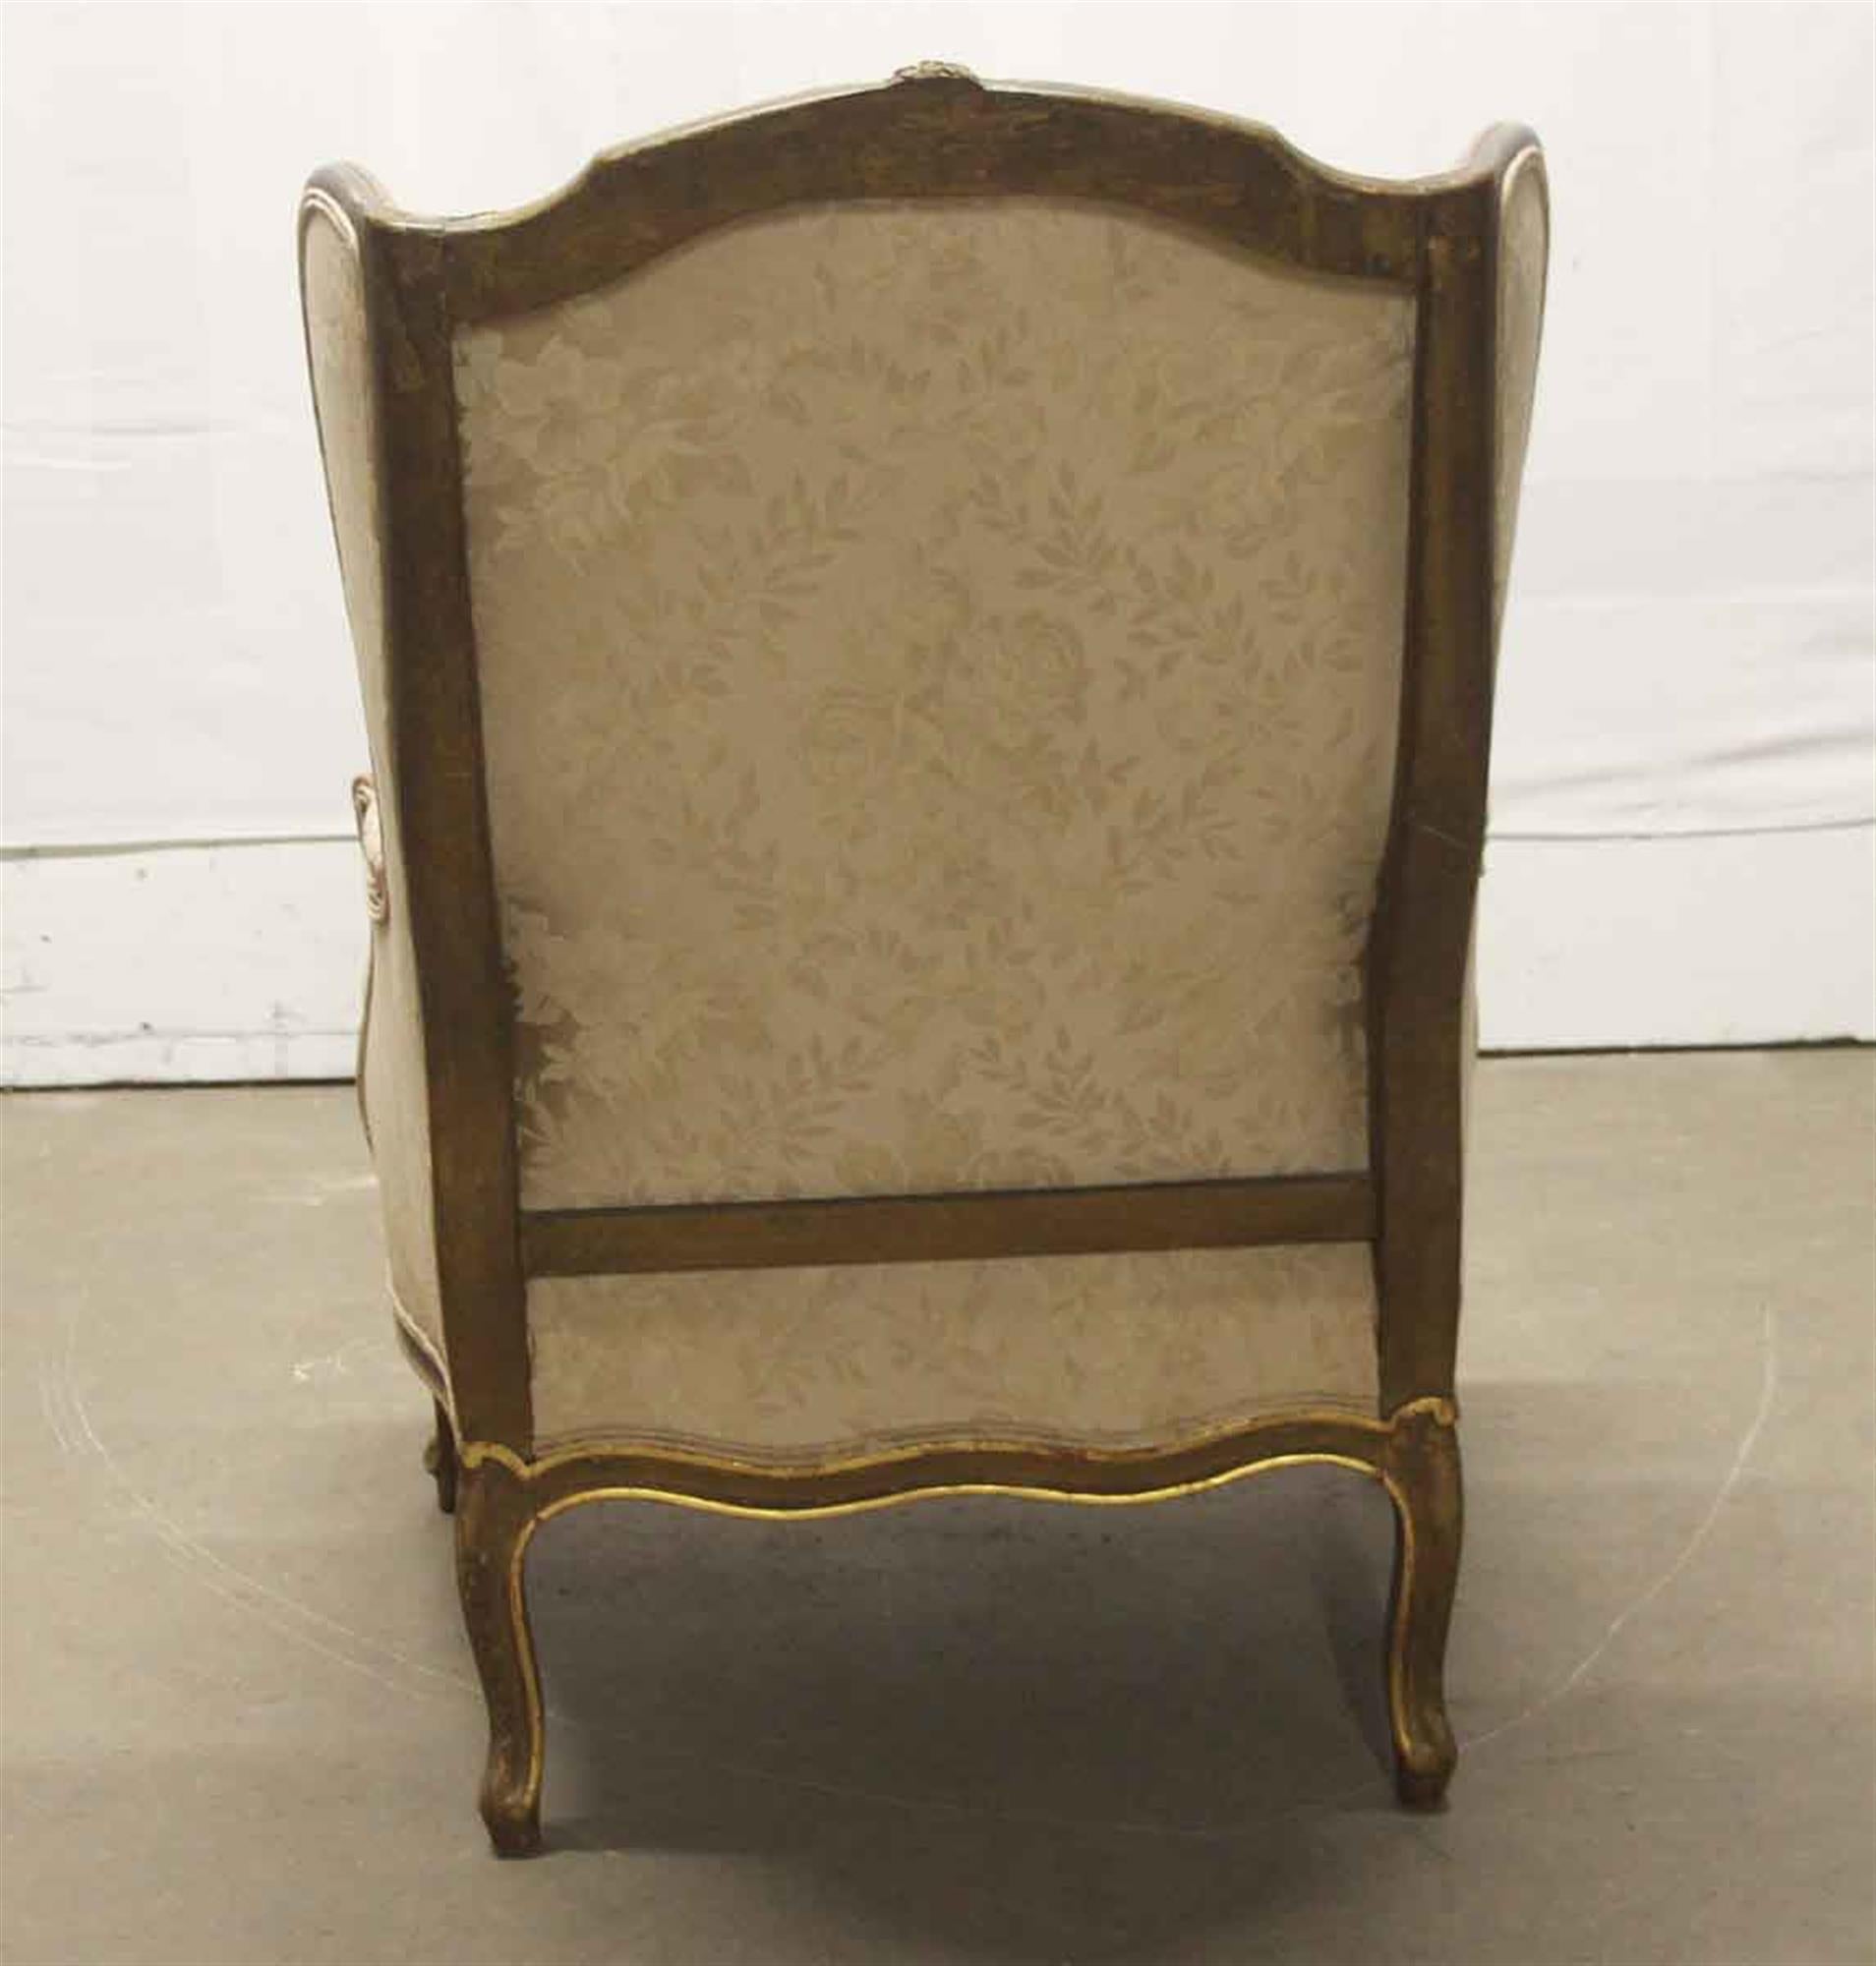 Early 20th Century 1920s Carved Wood Stuffed Wing Back Chair with Foral Cream Colored Upholstery